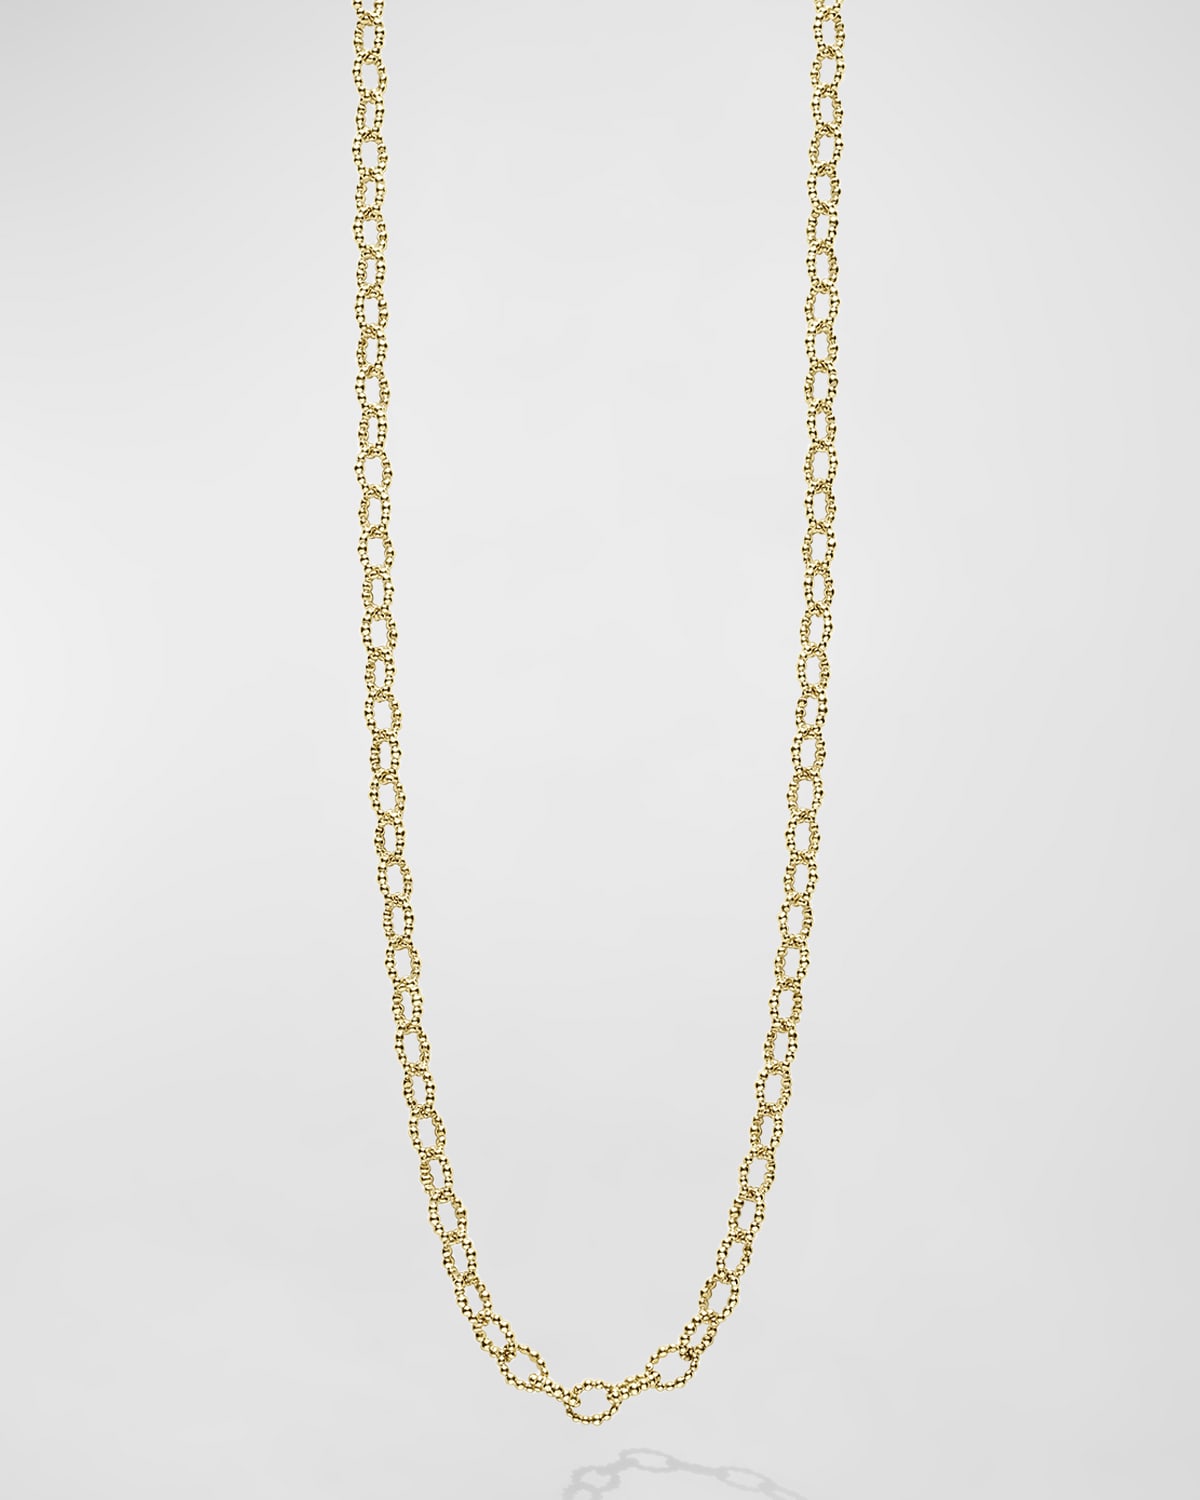 18K Signature Caviar 4x3mm Oval Link Chain Necklace, 18"L